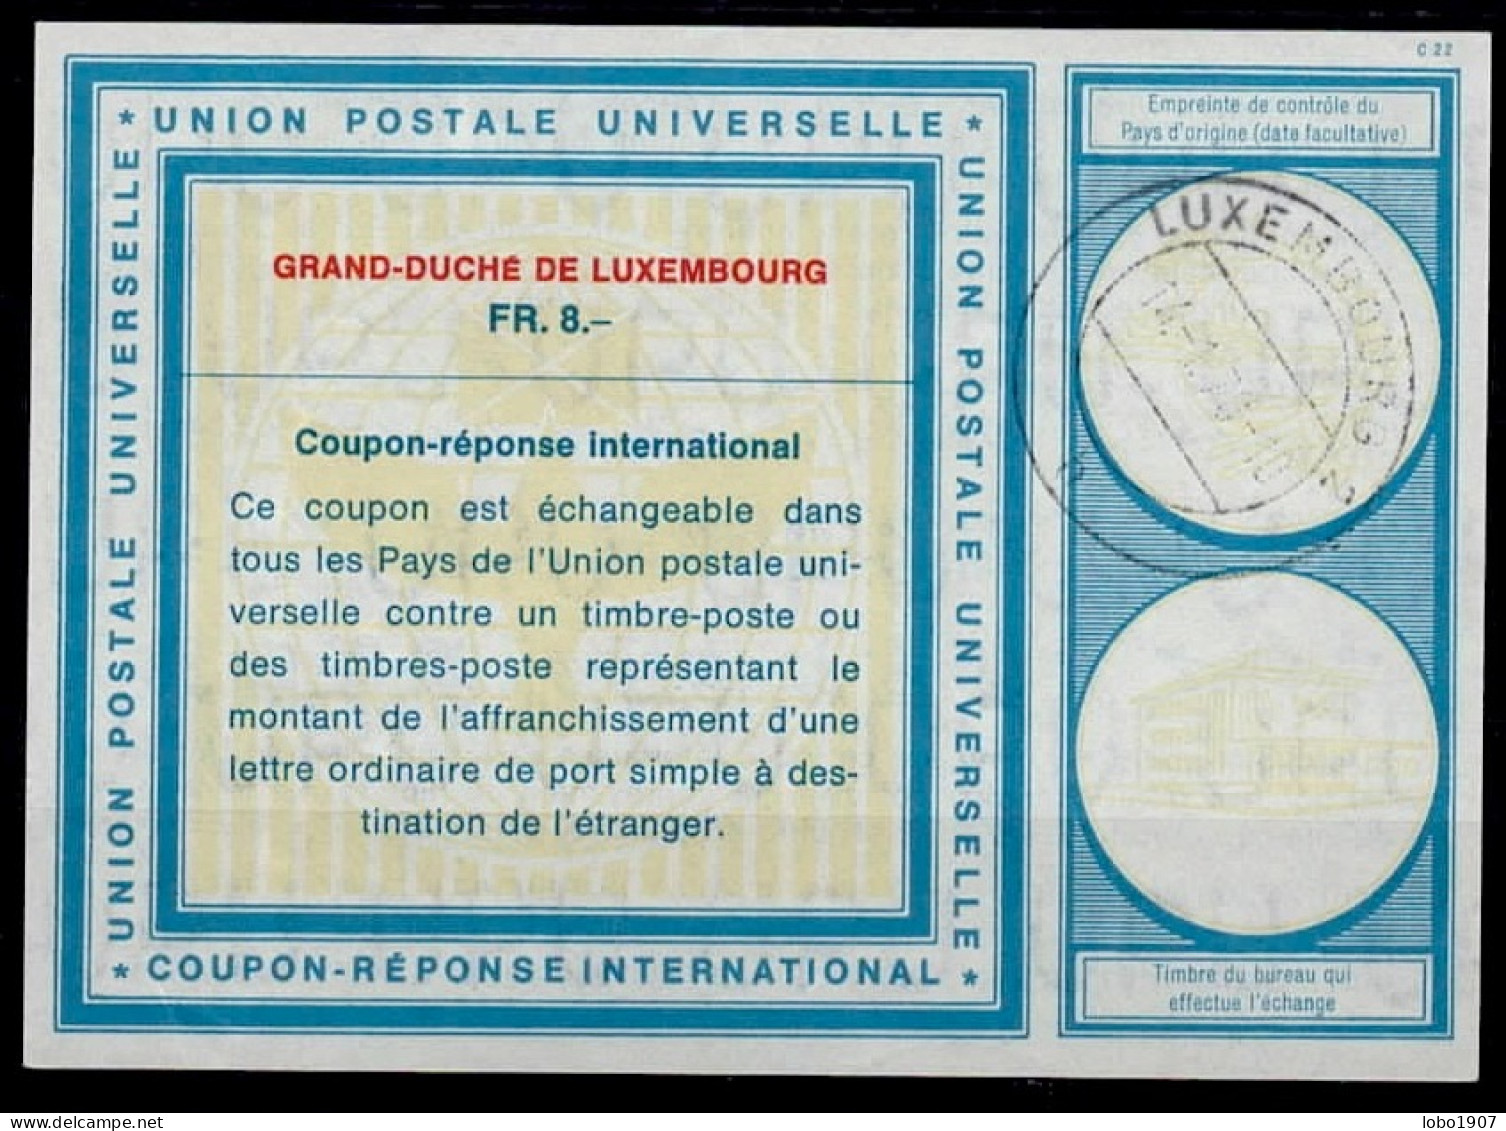 LUXEMBOURG Vi19  FR. 8.-- International Reply Coupon Reponse Antwortschein IRC IAS Cupón Respuesta   O LUX. 14.01.70 - Stamped Stationery